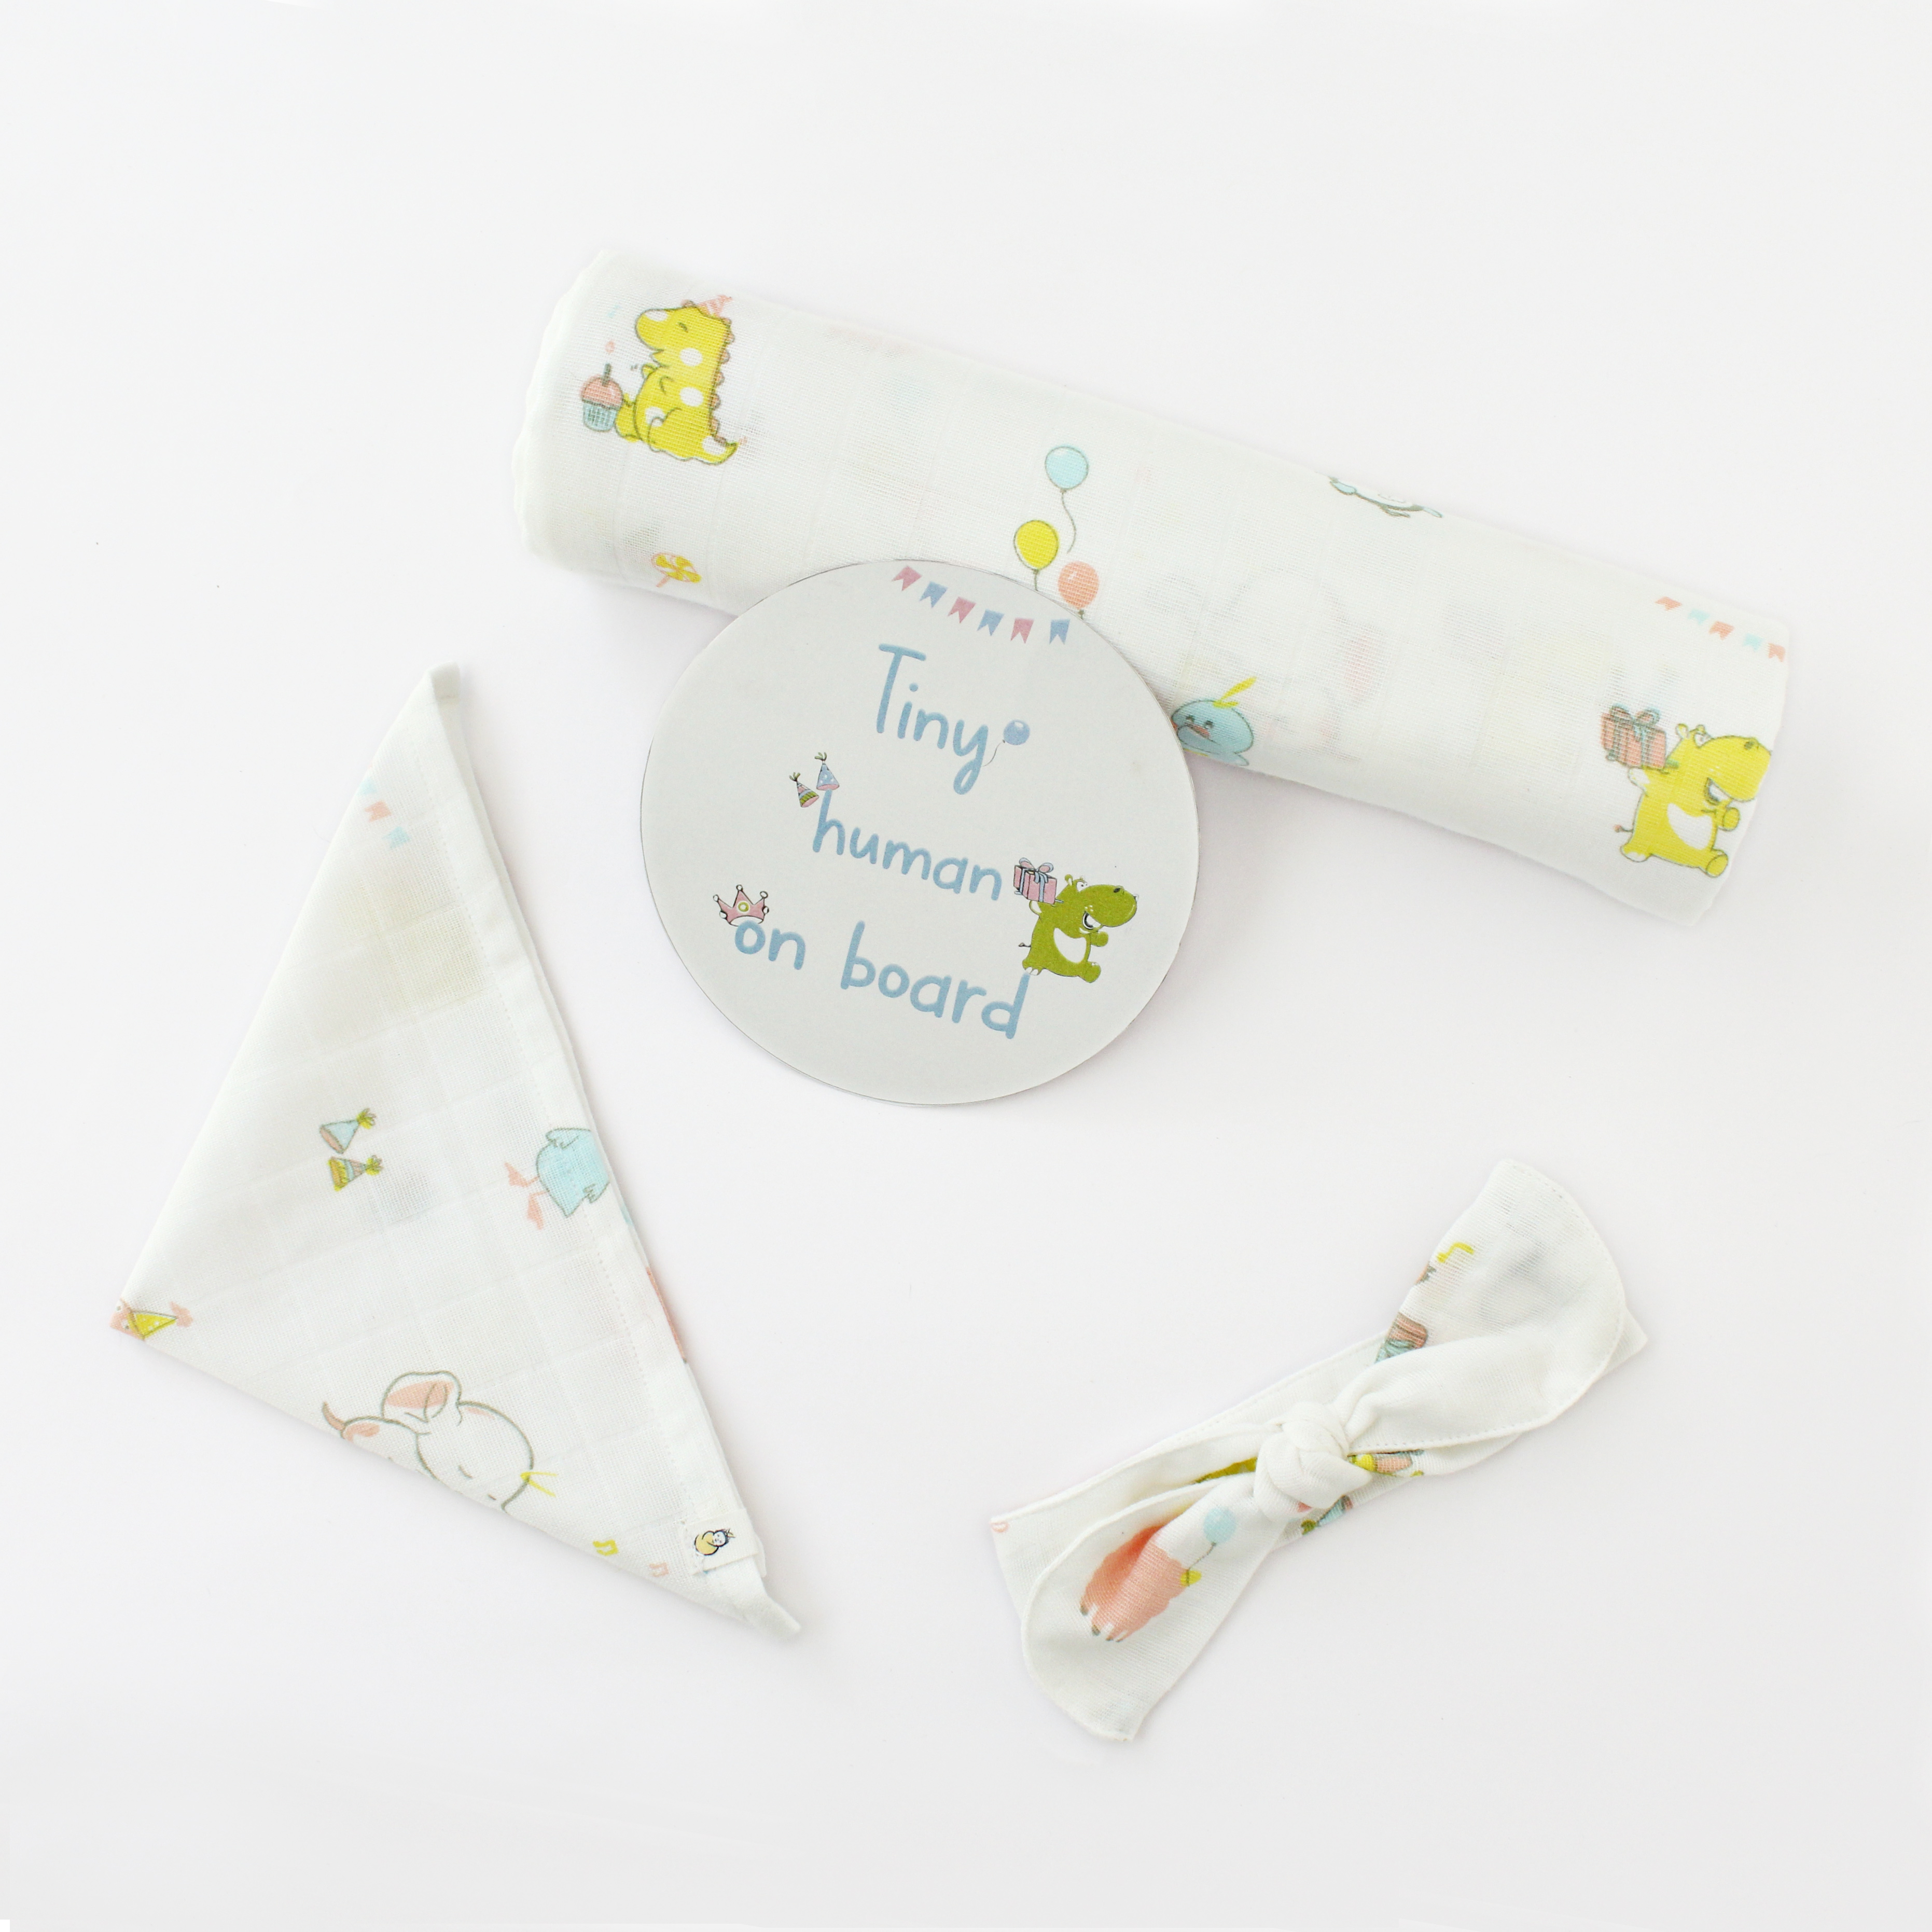 Yahoo! Let's Celebrate - Organic Cotton (double layer) Baby Muslin Swaddle/ Blanket - 110 X 110 cms